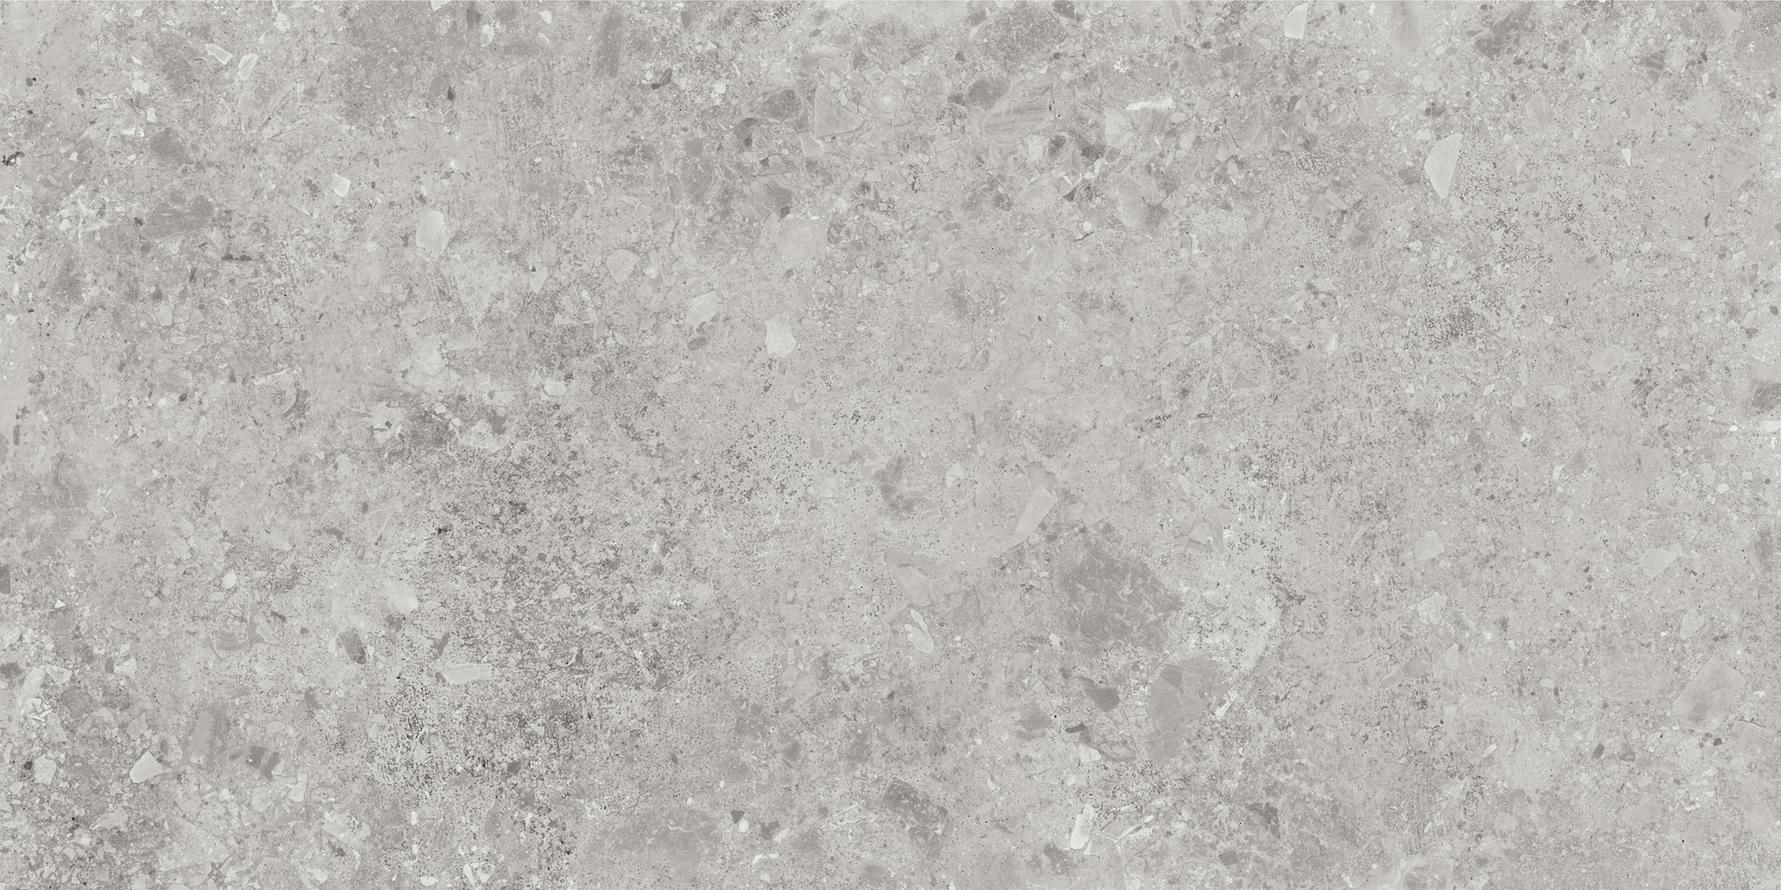 Magica Marstood Stone 05 Ceppo Di Gre Brushed Rectified 30x60